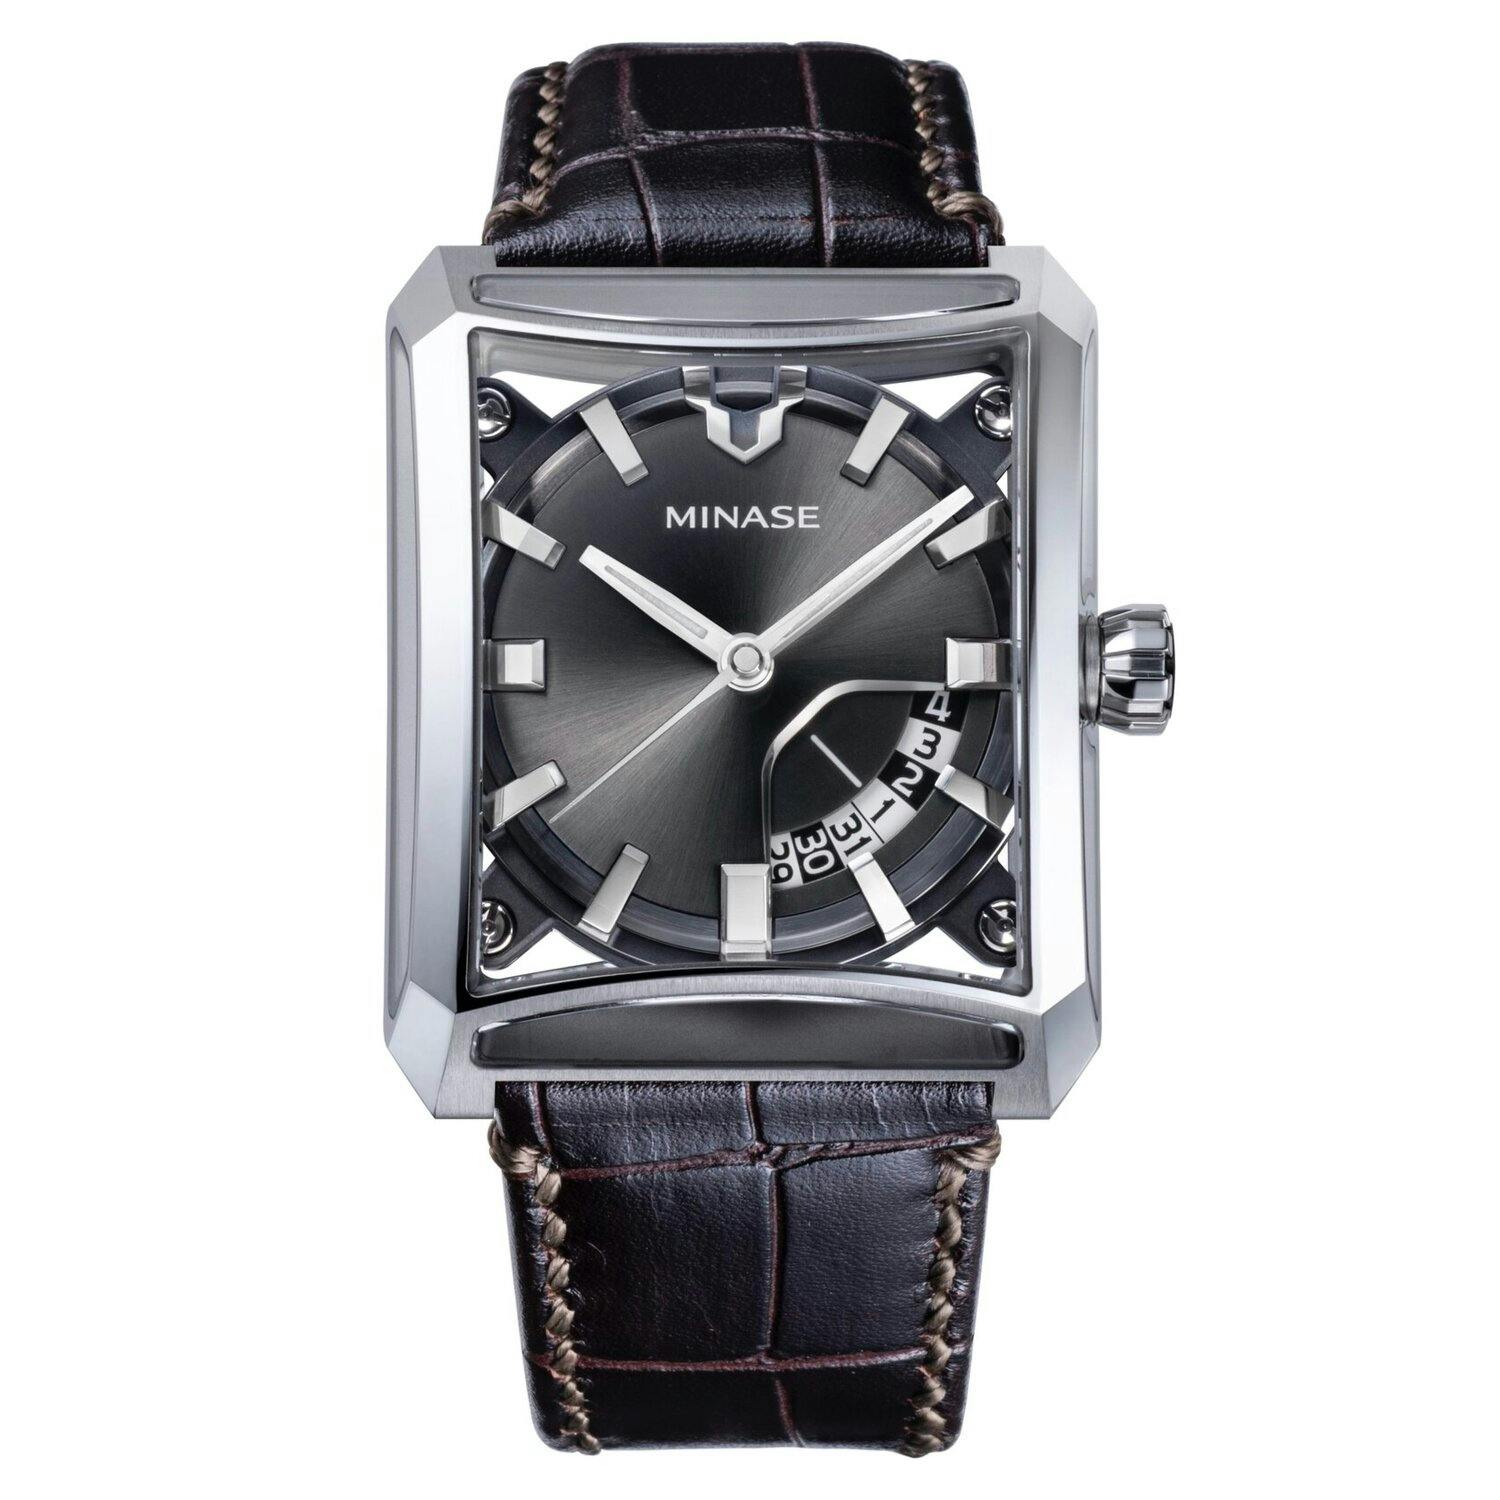 This highly unsusual case from a Japanese manufacturer Minase, has facets to the case containing crystal so that you can see the dial and movement from all different sides, while still preserving the strength and waterproofing of the case.